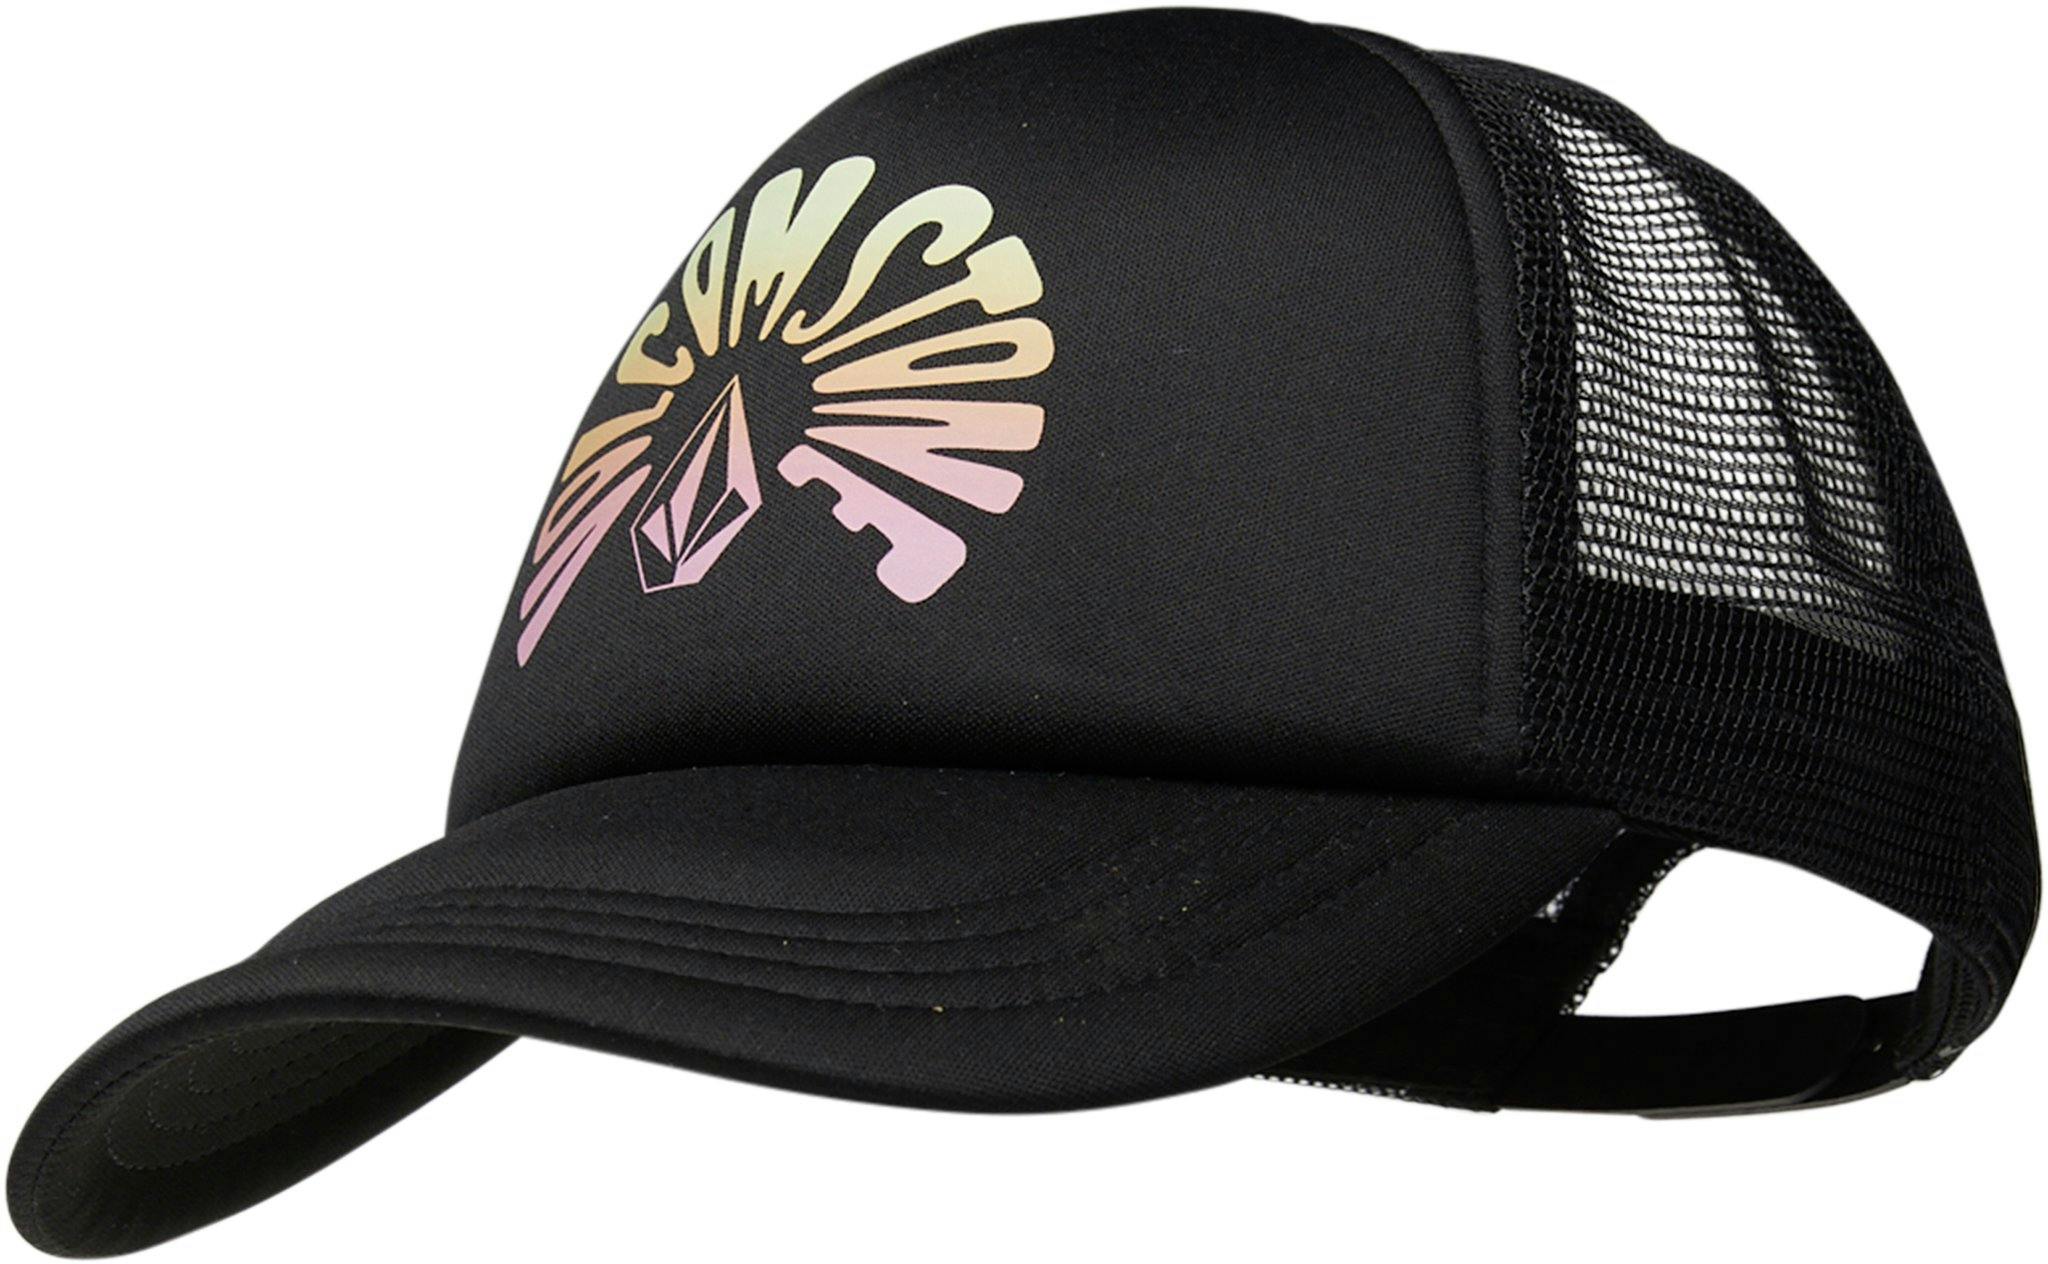 Product image for Hey Slims Hat - Girls